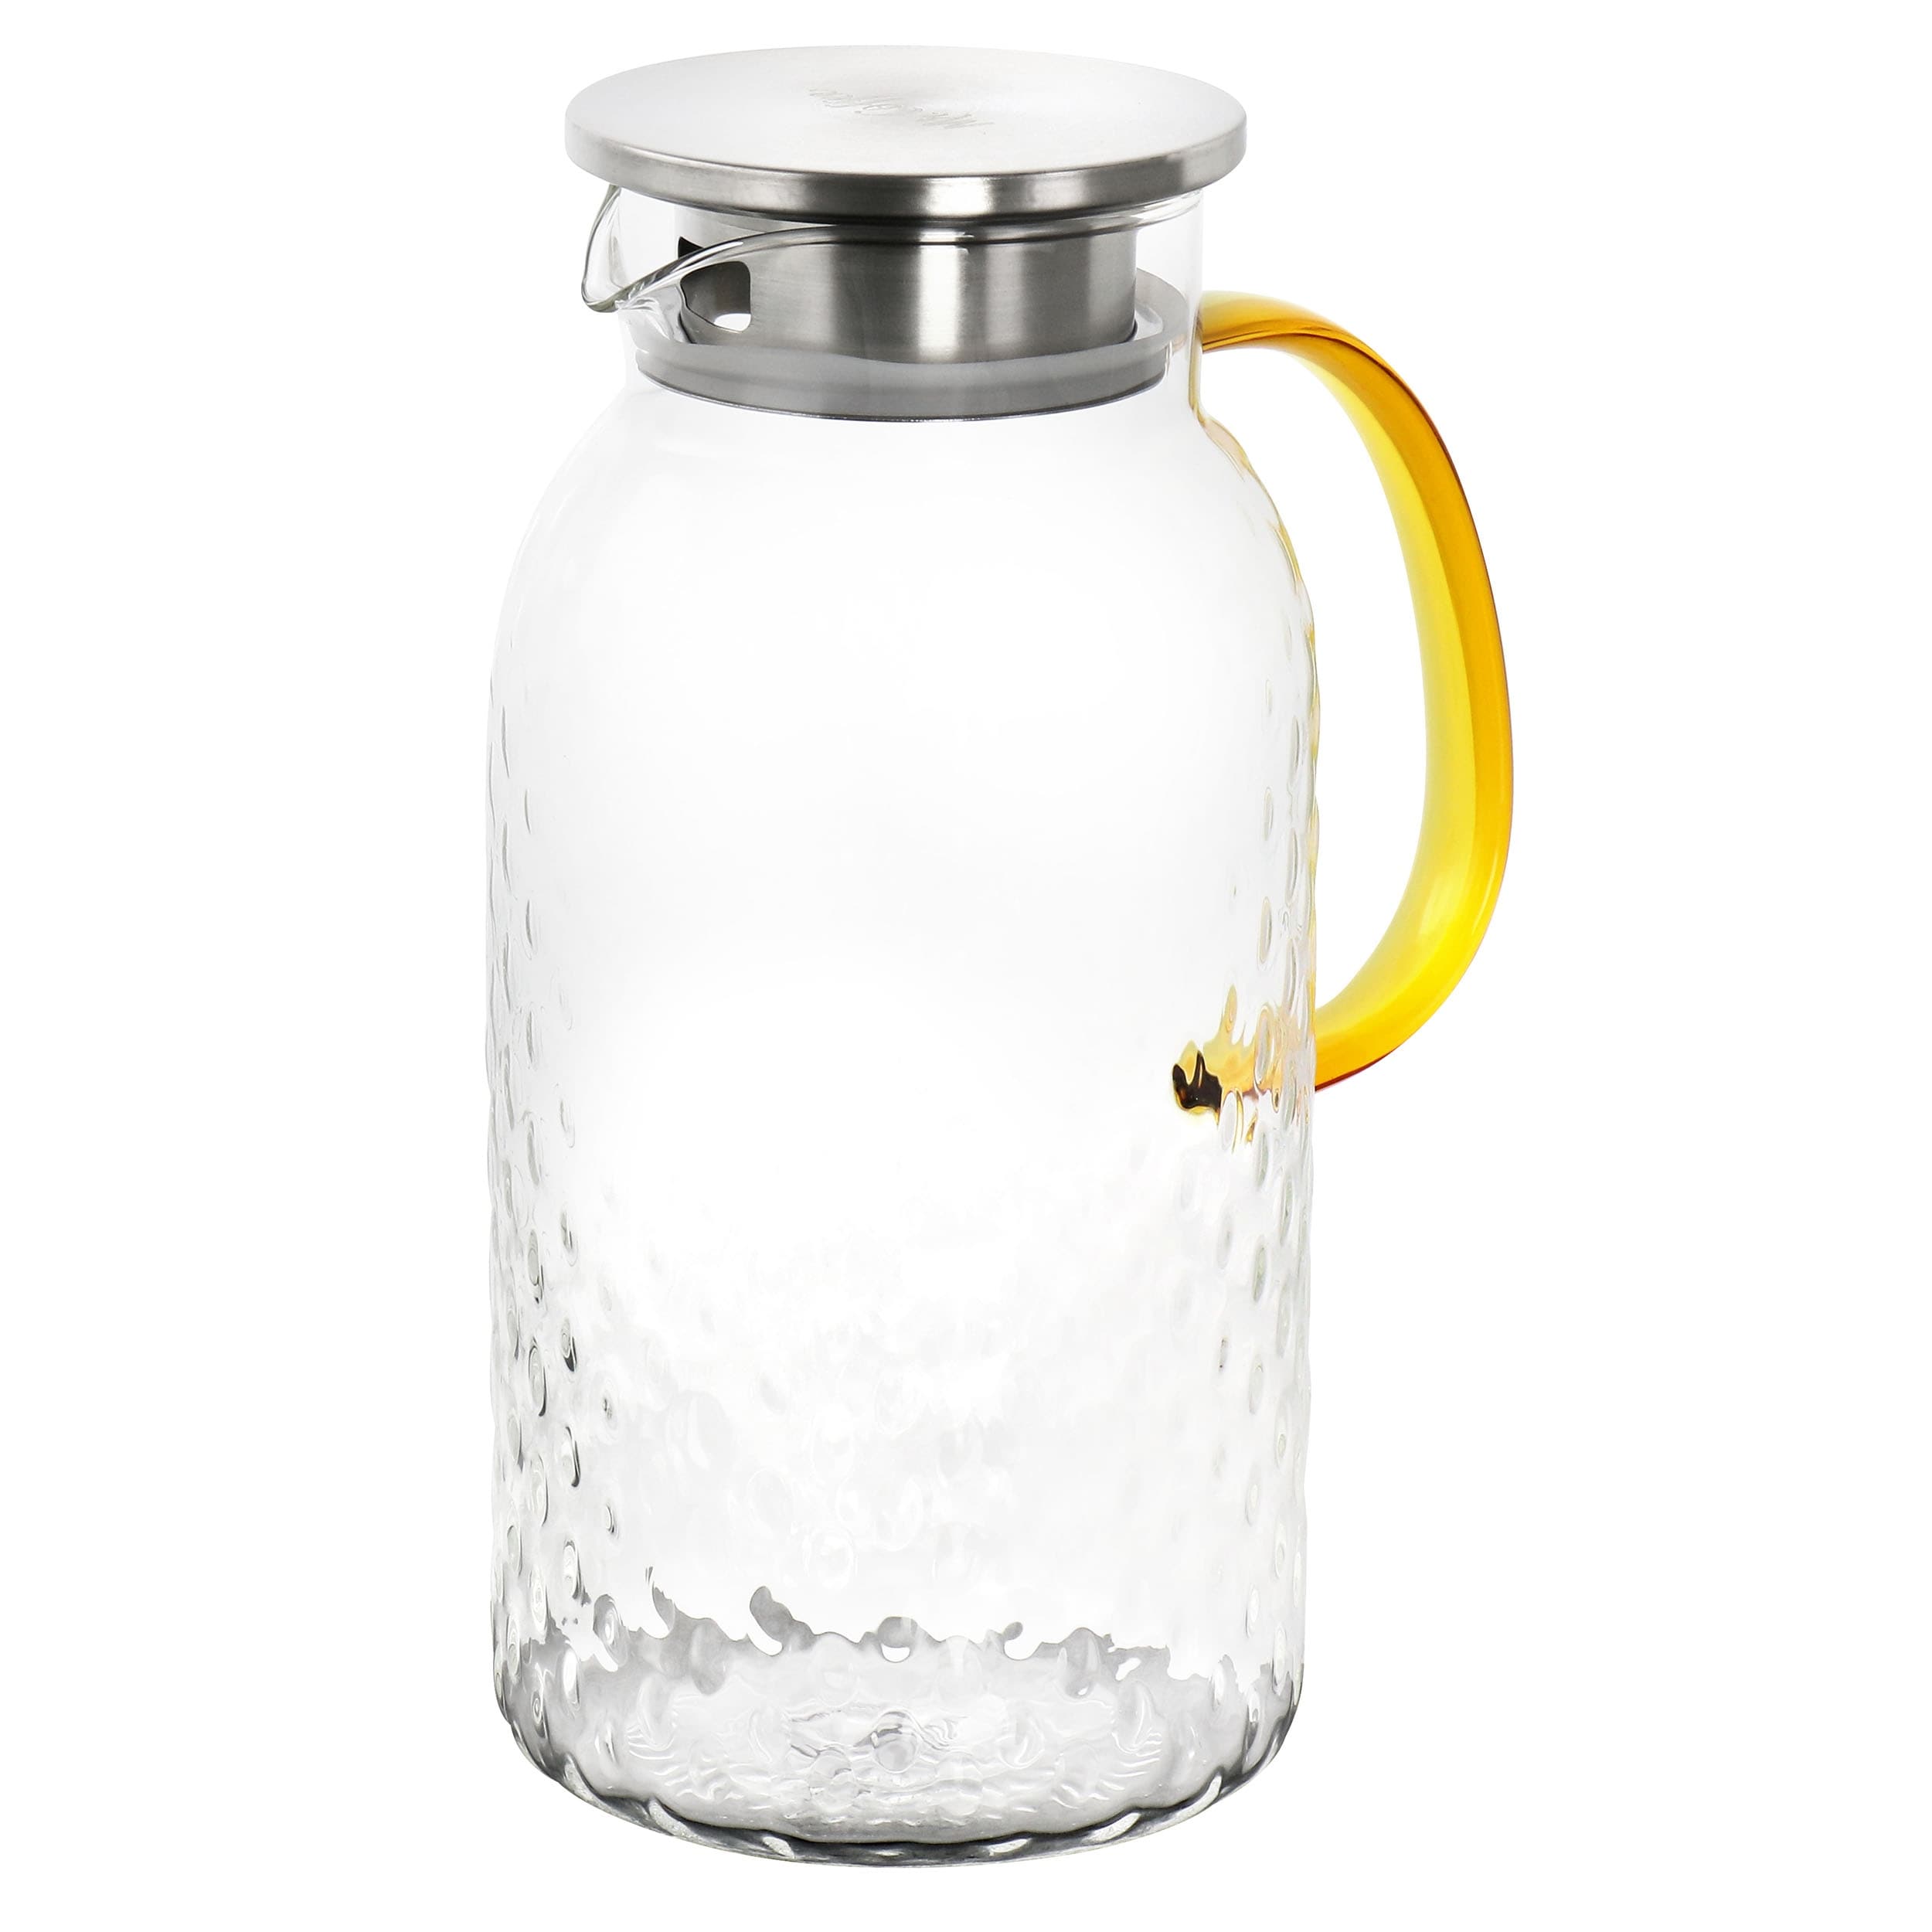 https://ak1.ostkcdn.com/images/products/is/images/direct/f6d1650b5e79f7adcbe89b1ea97627128a8b48f8/Mr.-Coffee-62oz-Heat-Resisitant-Borosilicate-Glass-Pitcher-with-Strainer-Lid.jpg